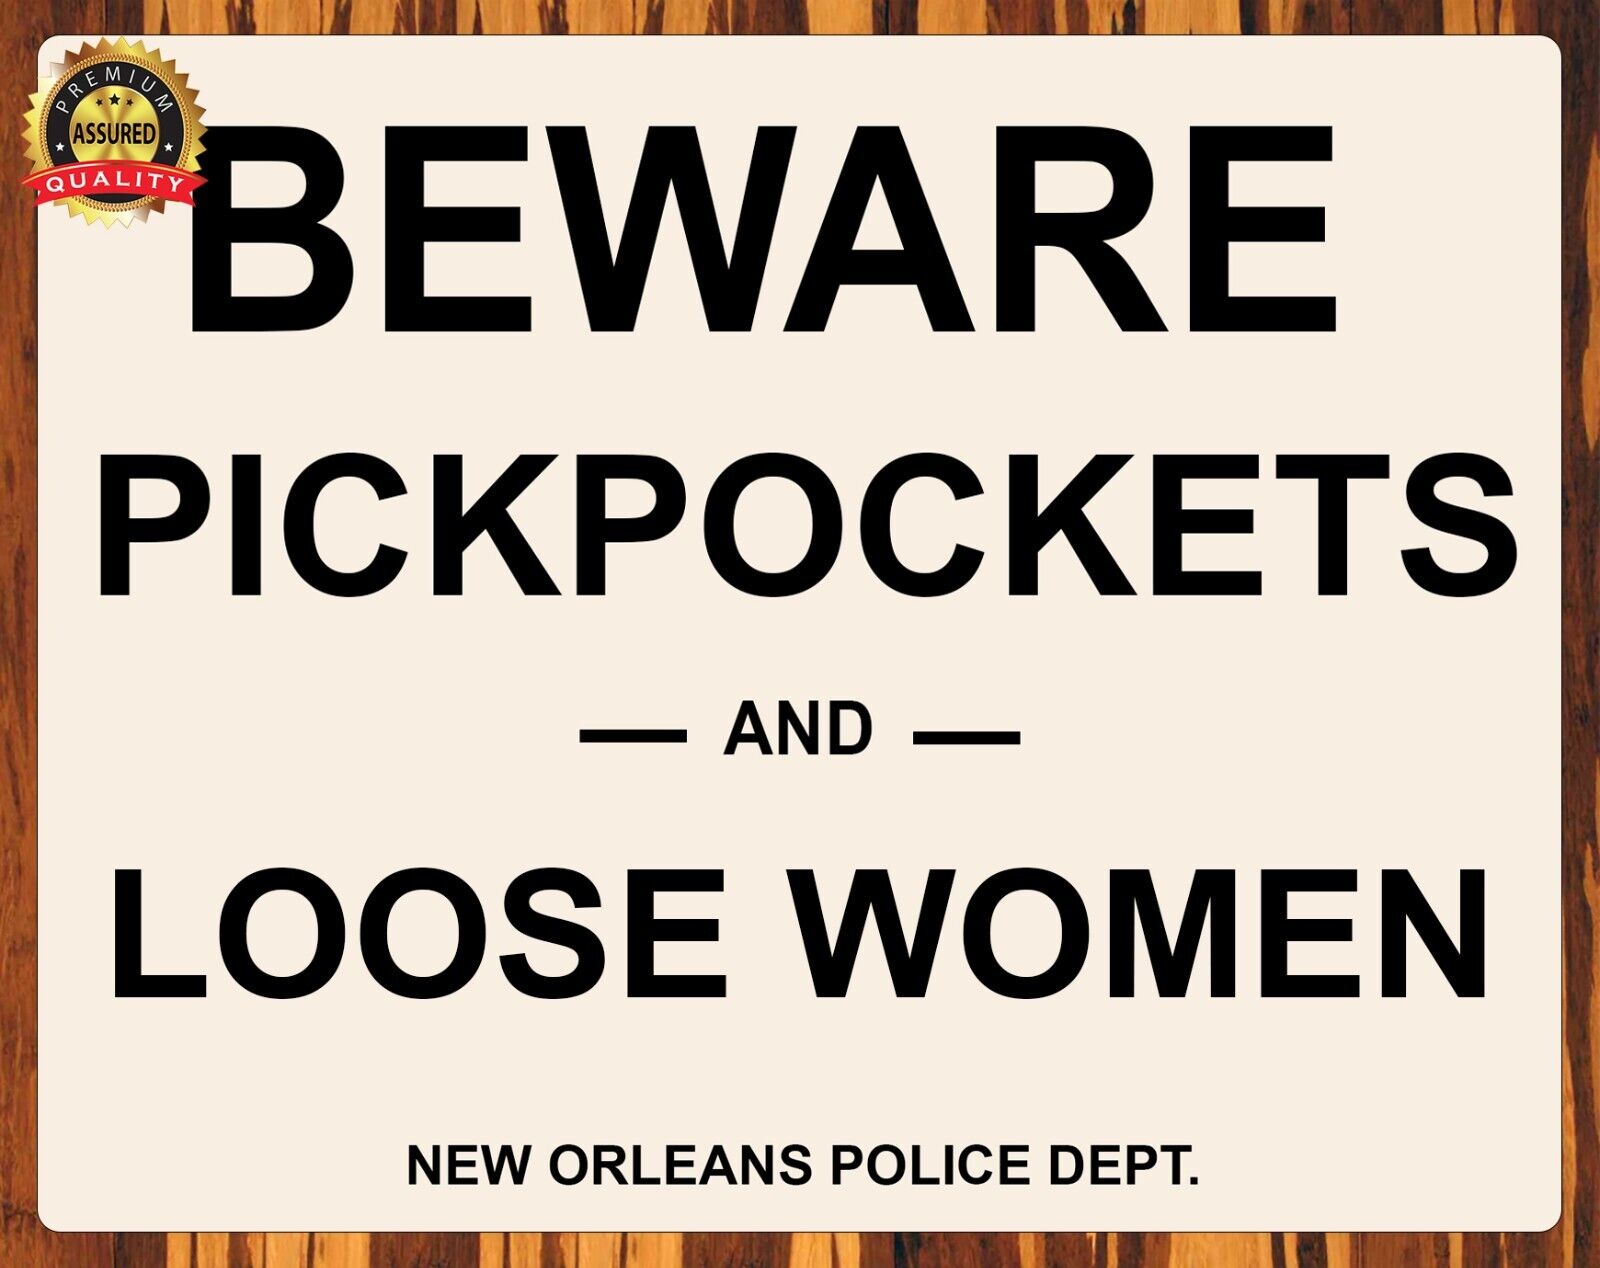 Beware Pickpockets and Loose Women - Restored - Humor - Metal Sign 11 x 14